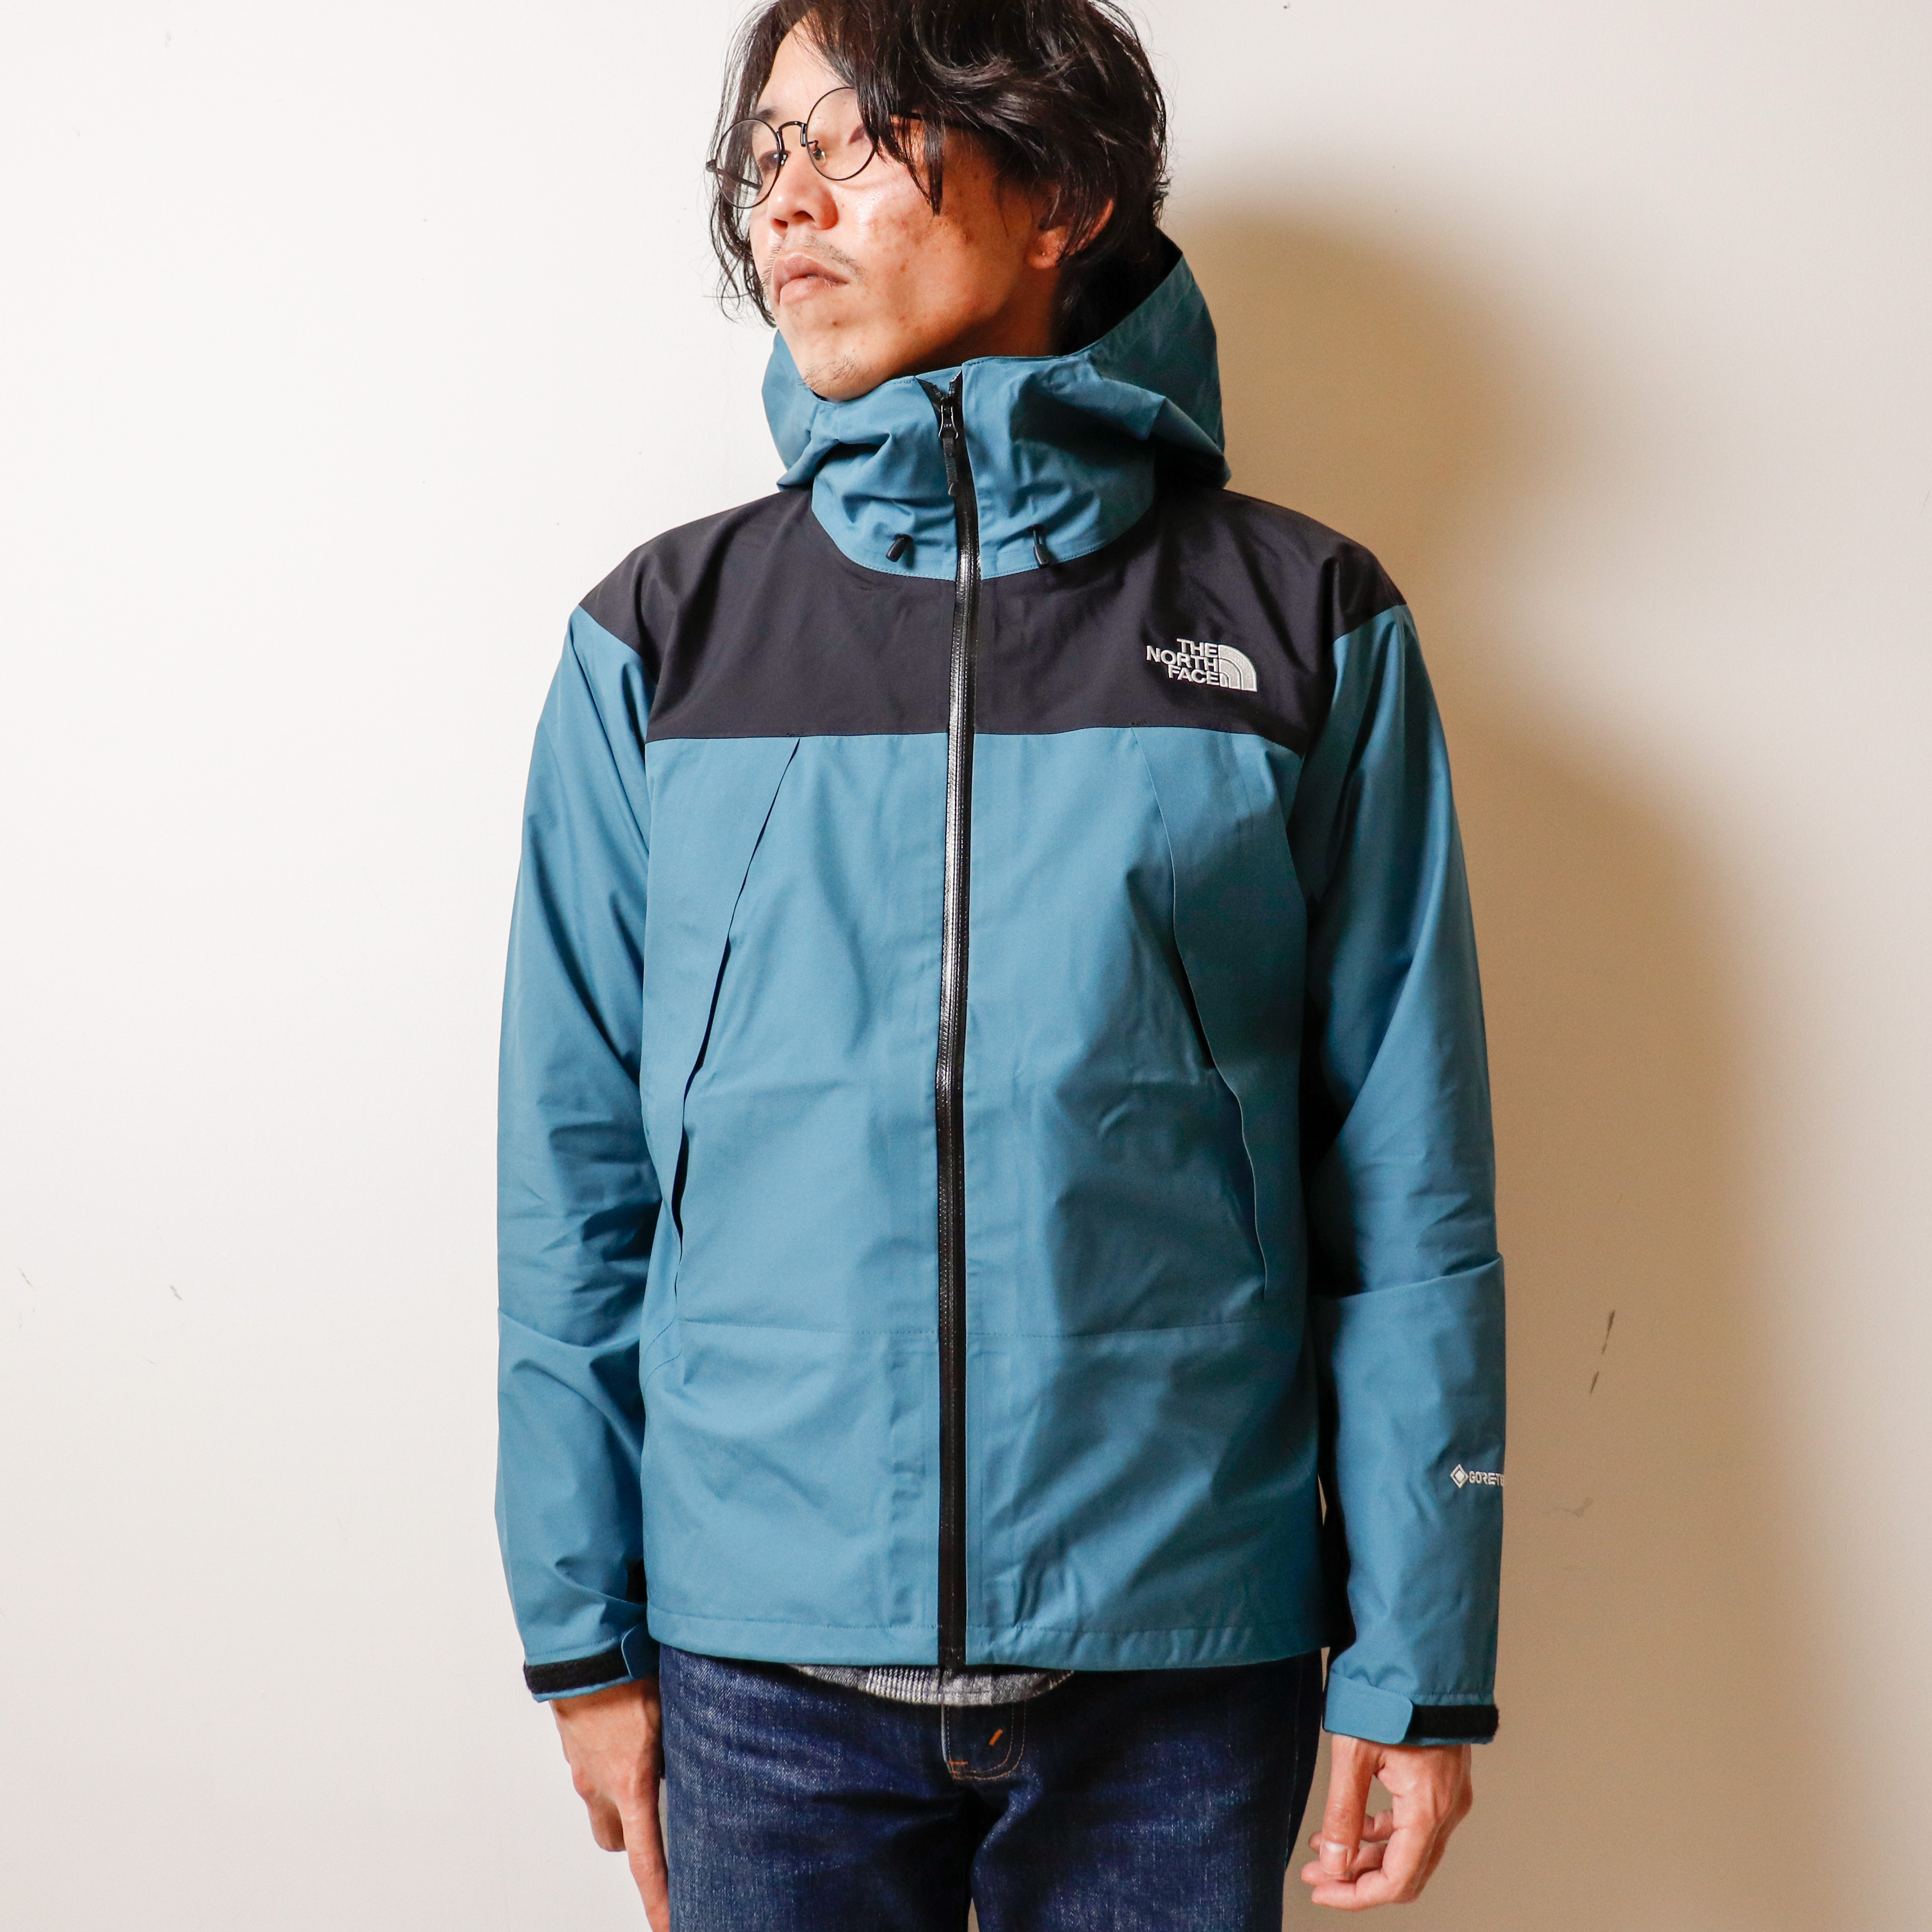 Men's】色んなシーンで。~『THE NORTH FACE』NEW ARRIVAL ~ | BLUEBEAT ...